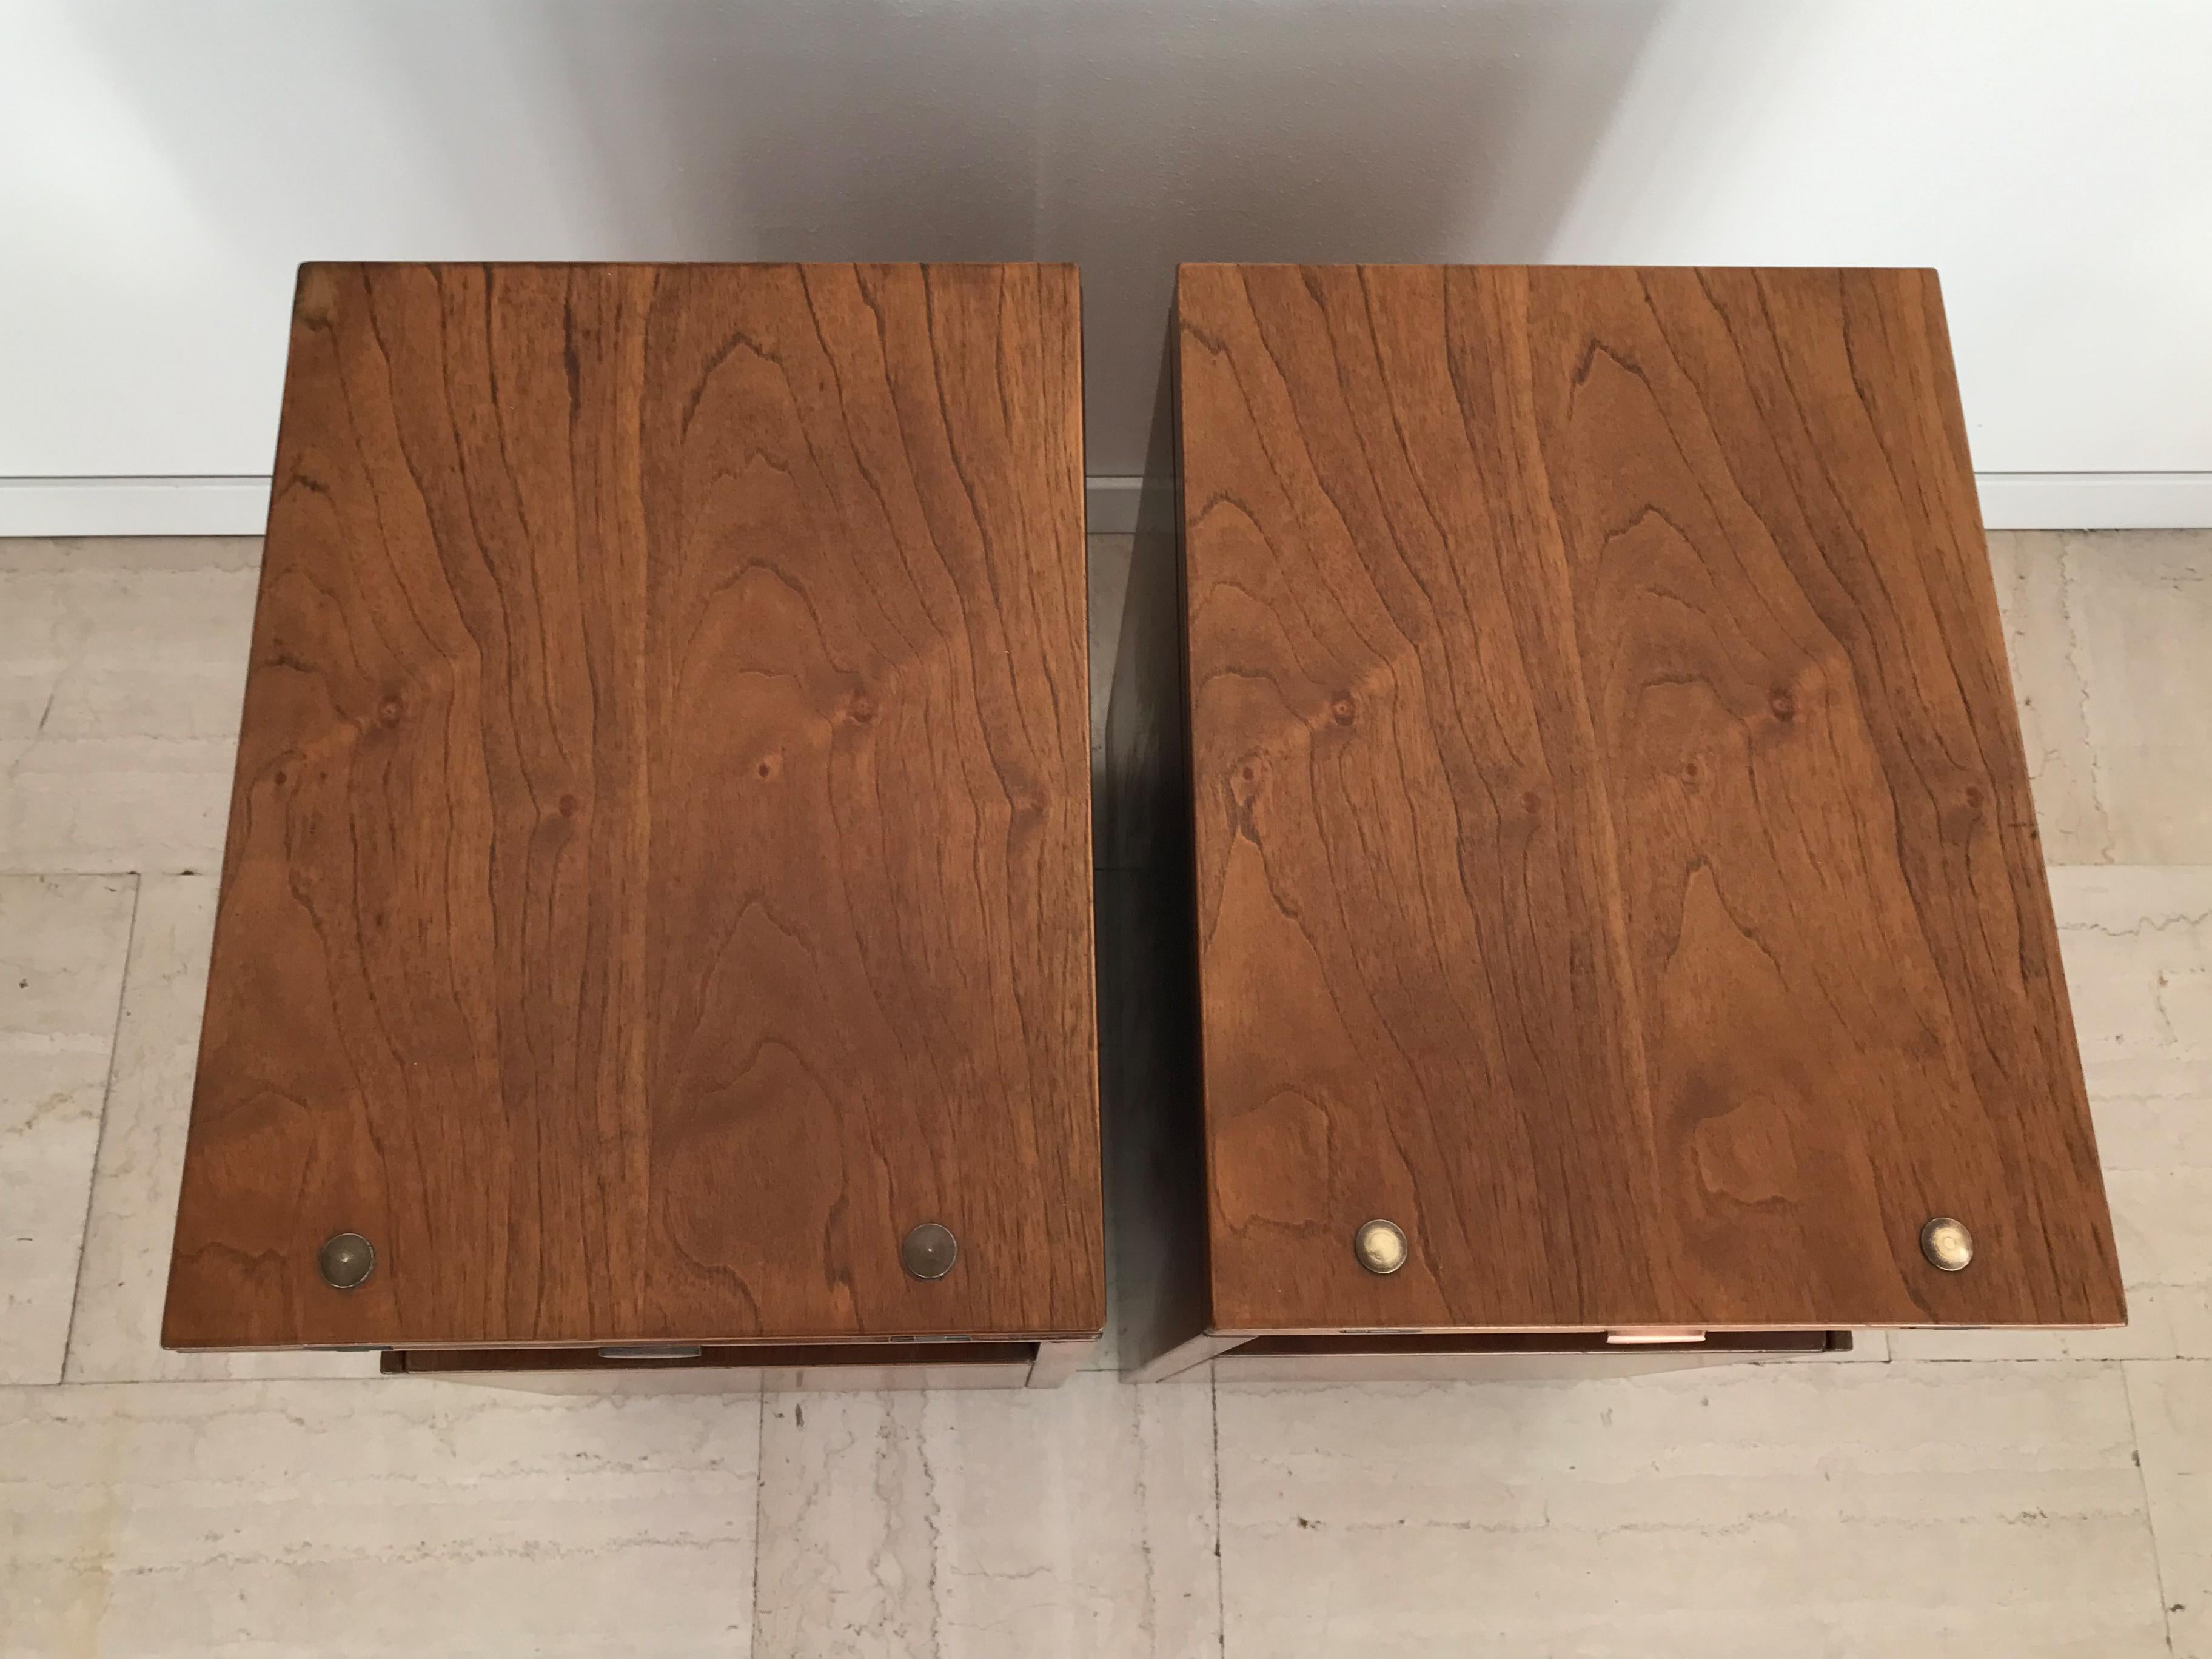 Giovanni Michelucci Poltronova Italian Wood Bedside Tables Nithg Stands 1960s For Sale 9